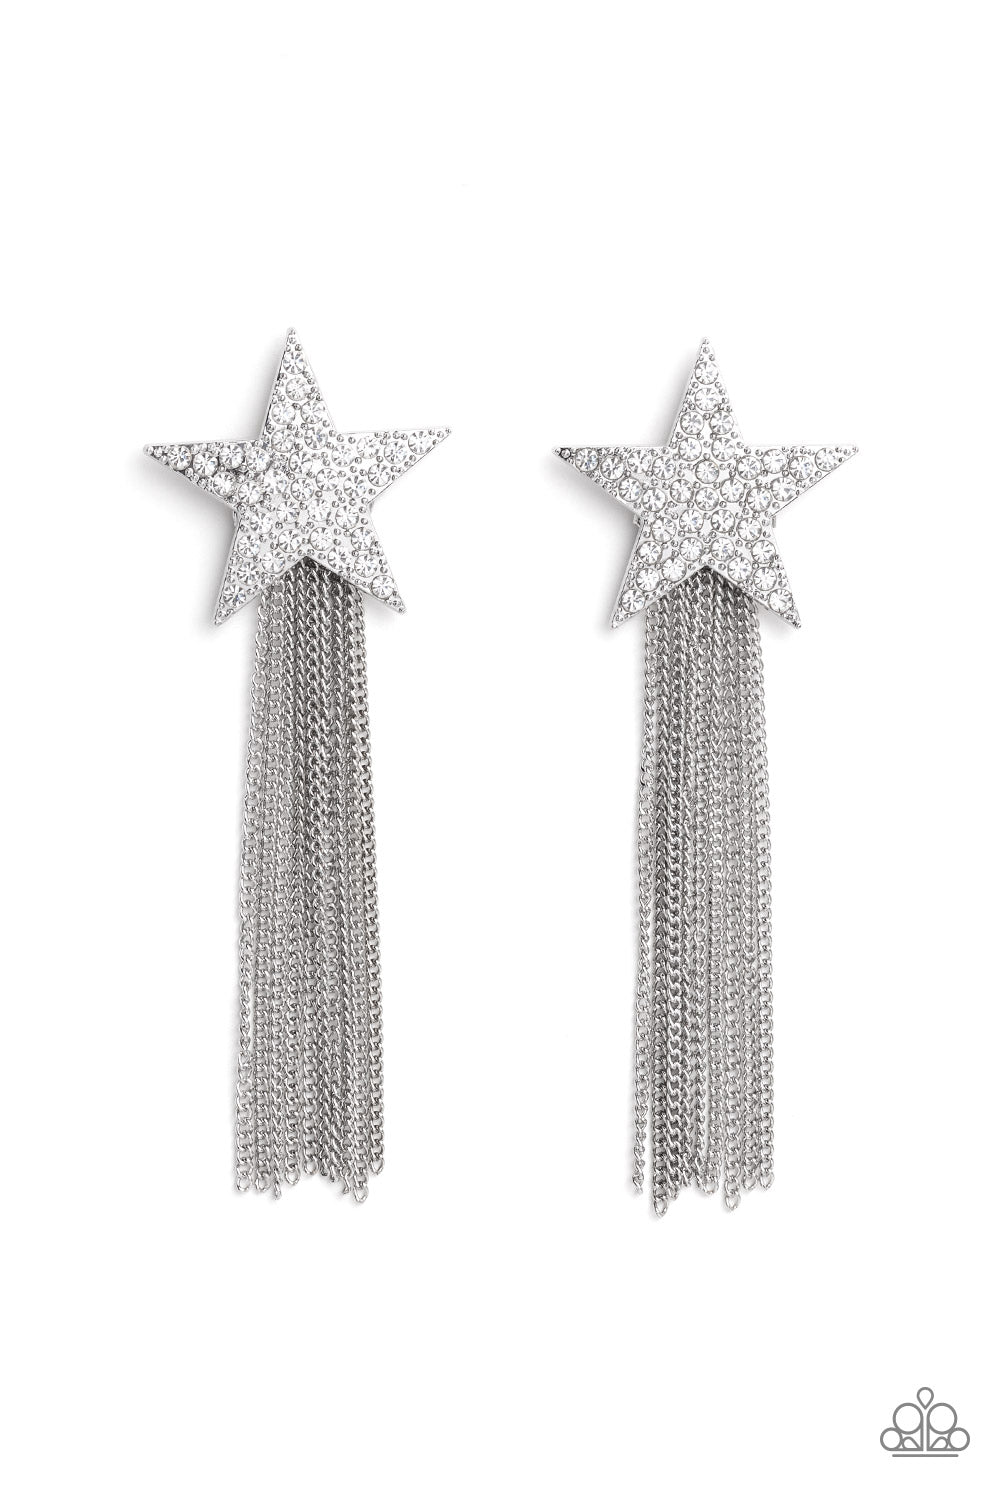 Paparazzi Accessories Superstar Solo - White A curtain of silver chains streams out from the bottom of an oversized silver star encrusted in blinding white rhinestones, resulting in a stellar tassel. Earring attaches to a standard post fitting. Sold as on